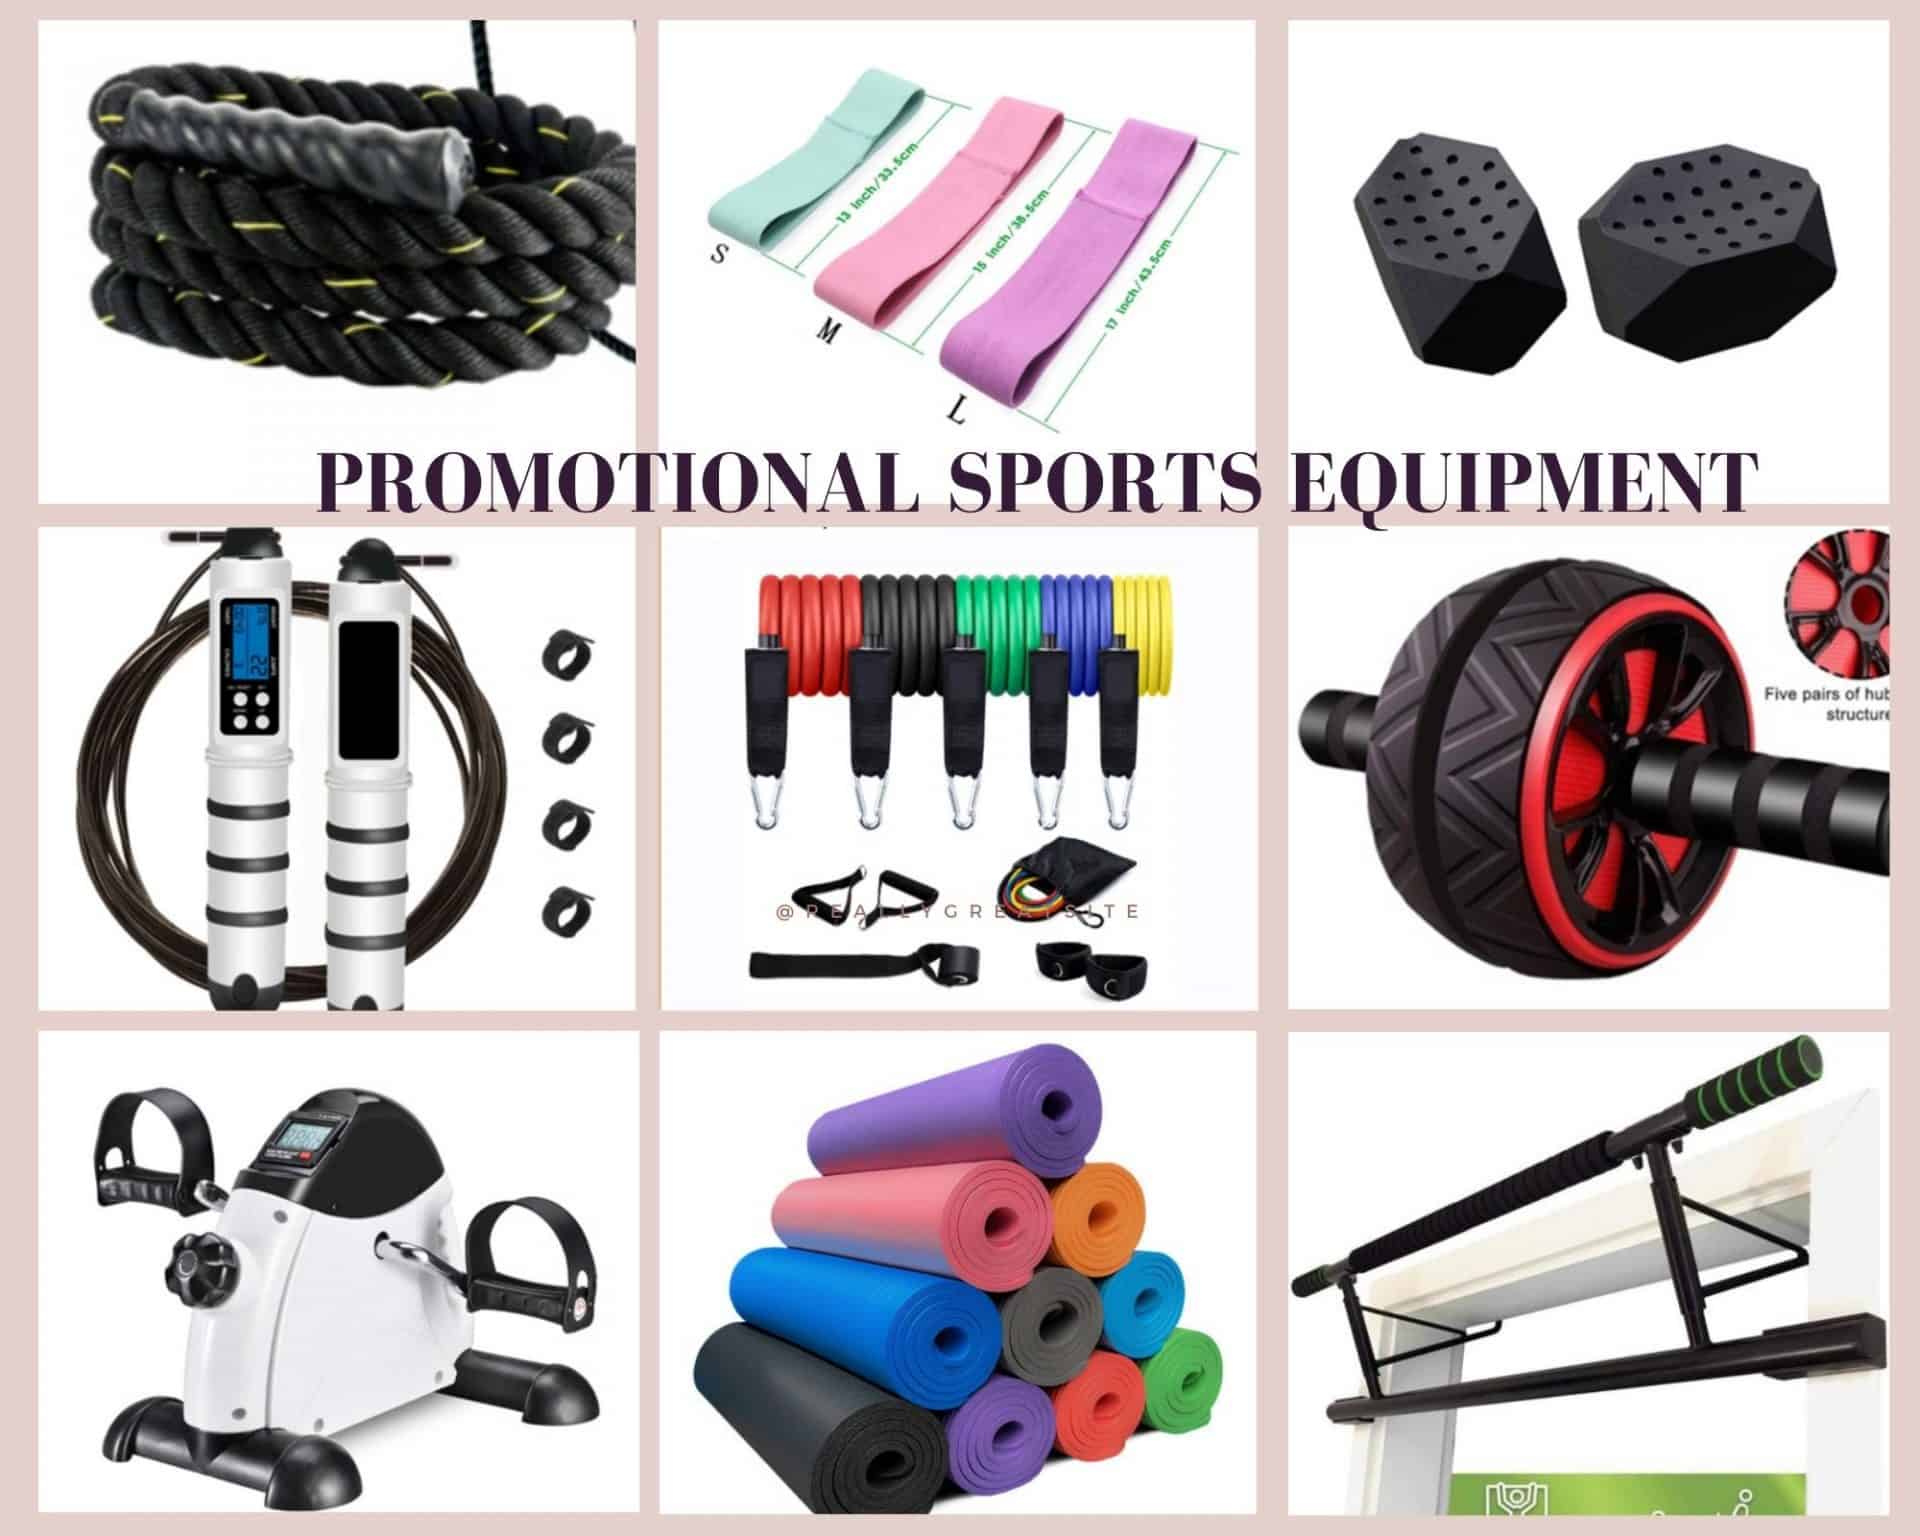 Athletic equipment giveaways